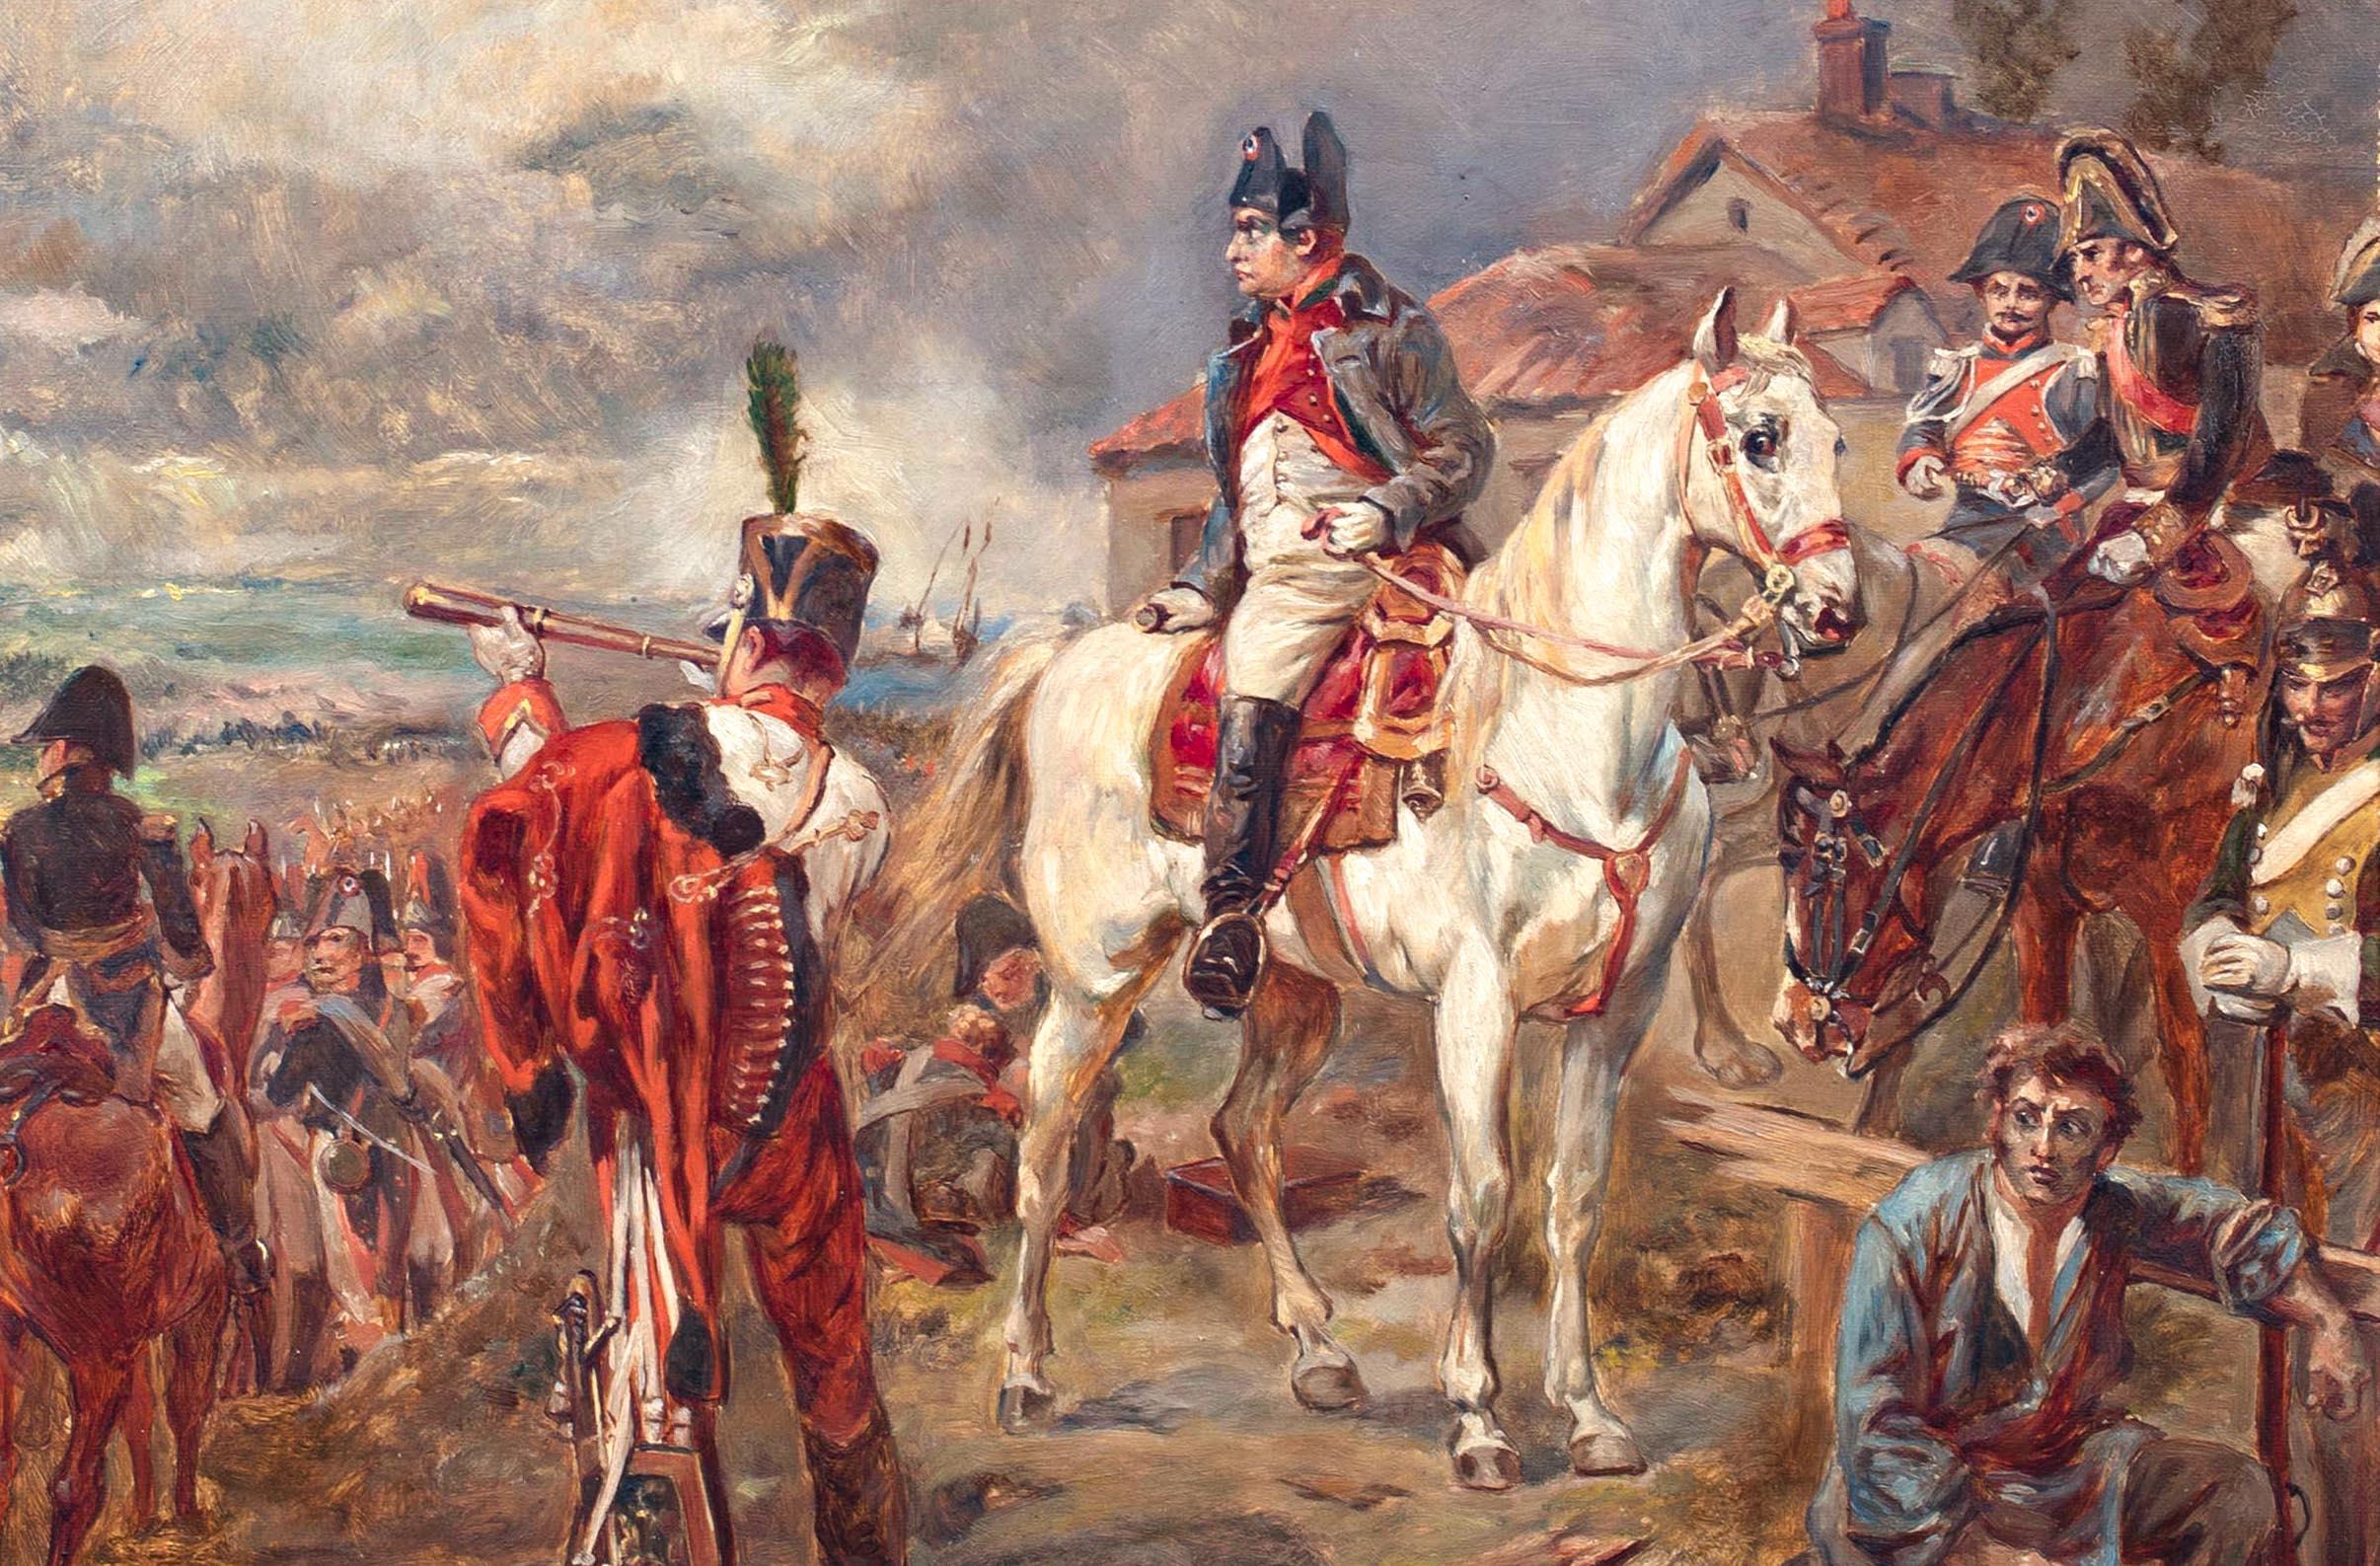 Napoleon At The Battle Of Waterloo, 19th Century

by Ernest CROFTS (1847-1911) to $130,000

Large 19th century Napoleonic Wars history painting of Napoleon at the Battle Of Waterloo, 1815, oil on canvas by Ernest Crofts. Excellent quality and